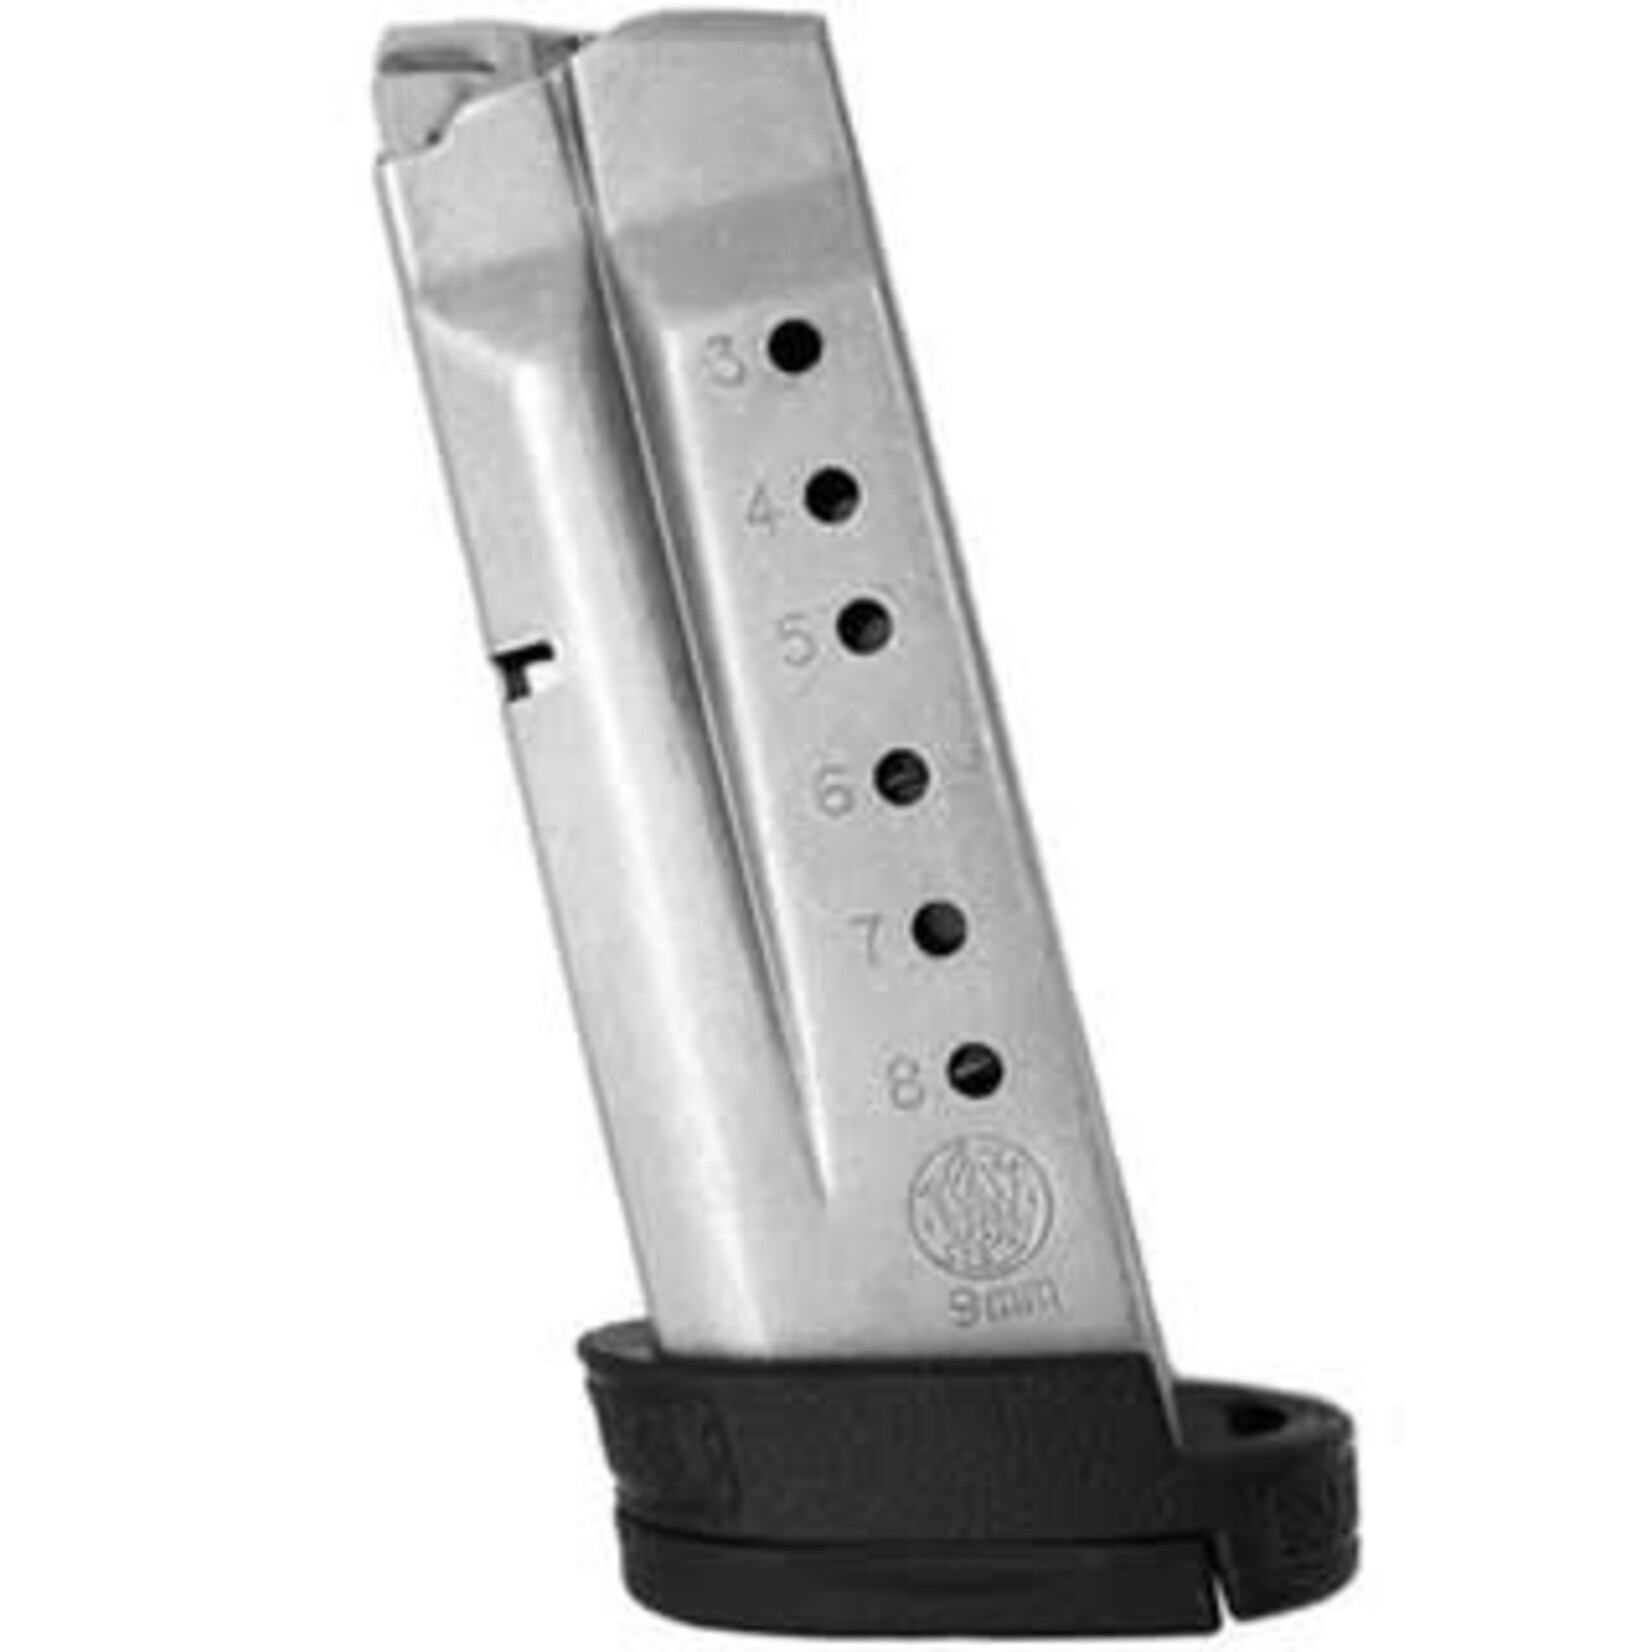 Smith & Wesson Magazine S&W M&P Shield 9mm Luger 8-Round Stainless Steel